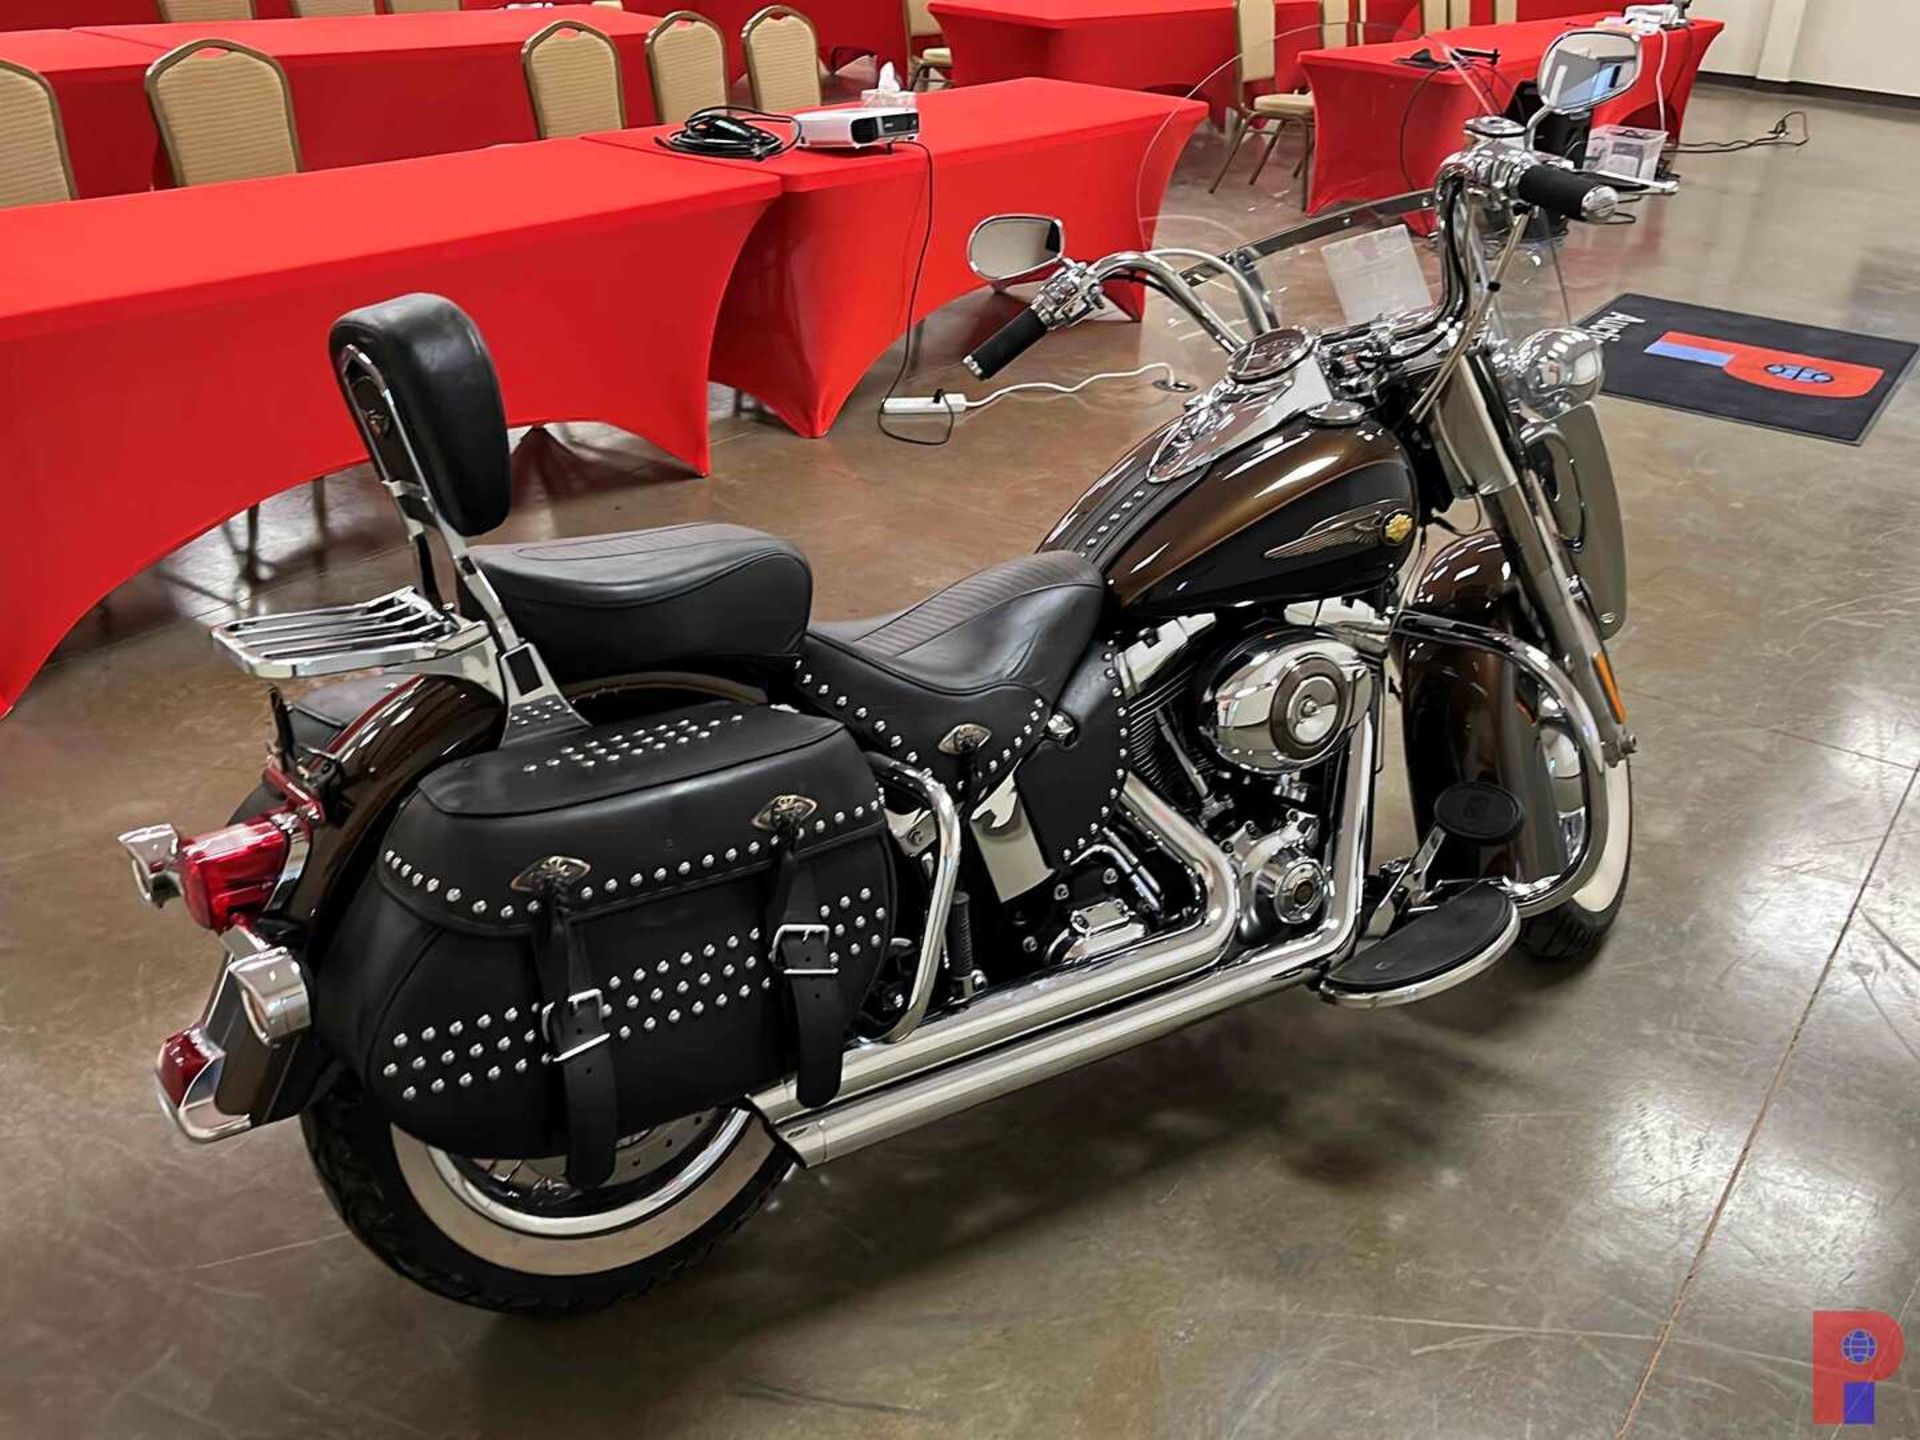 2013 HARLEY DAVIDSON HERITAGE SOFTAIL CLASSIC NUMBER: 1180/1900 - Image 3 of 9